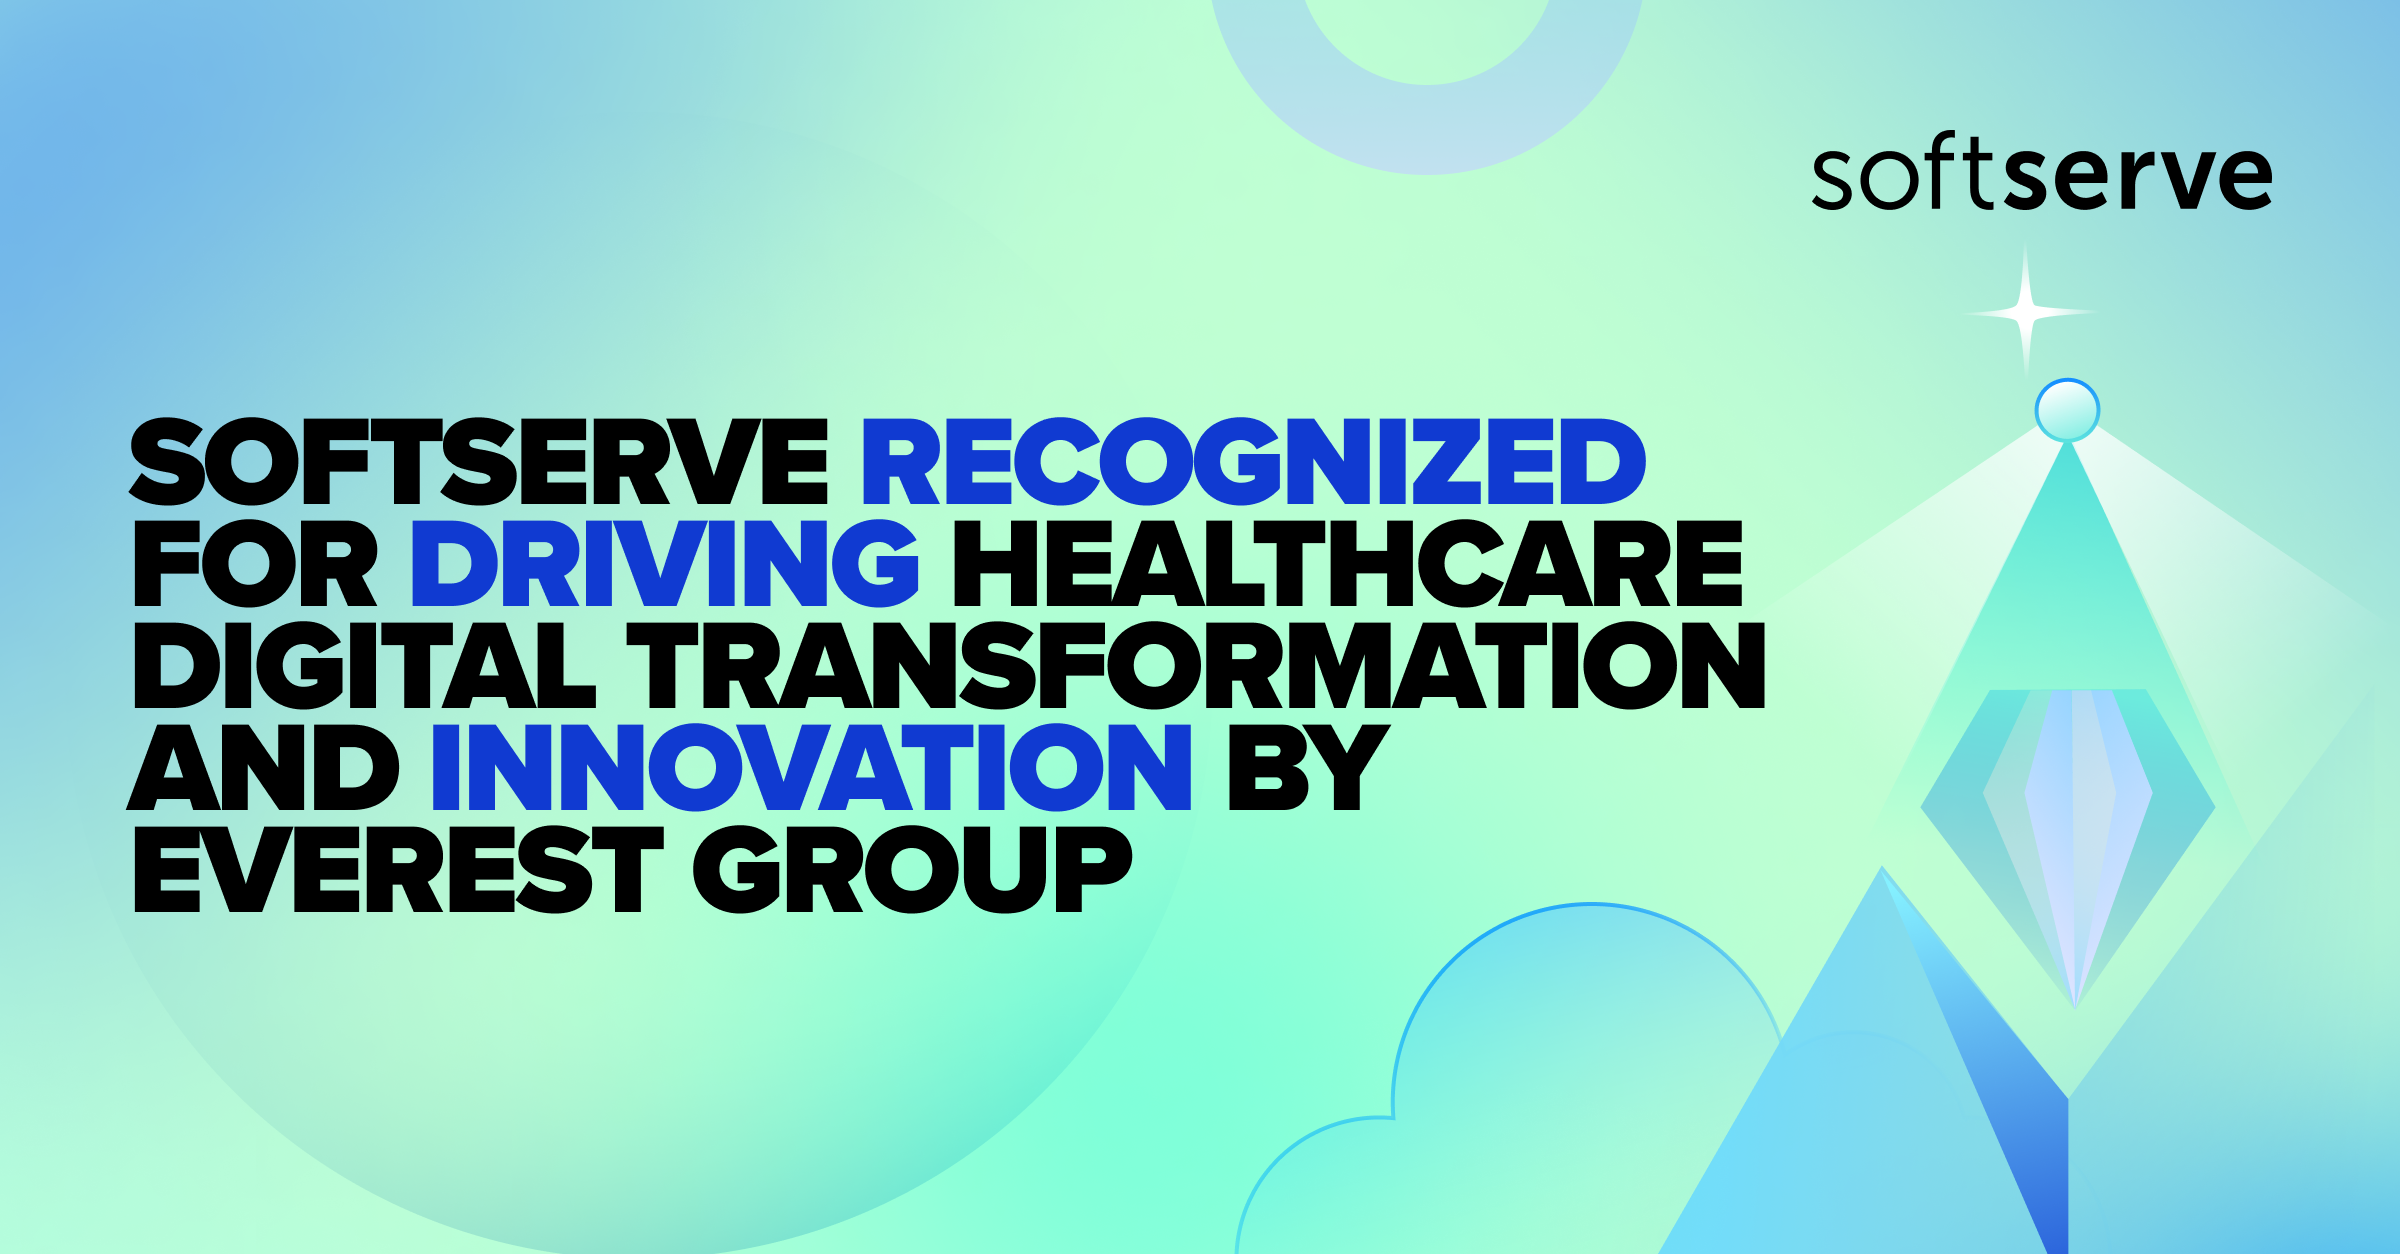 softserve-recognized-for-driving-hc-digital-transformation-and-innovation-everest-group-social